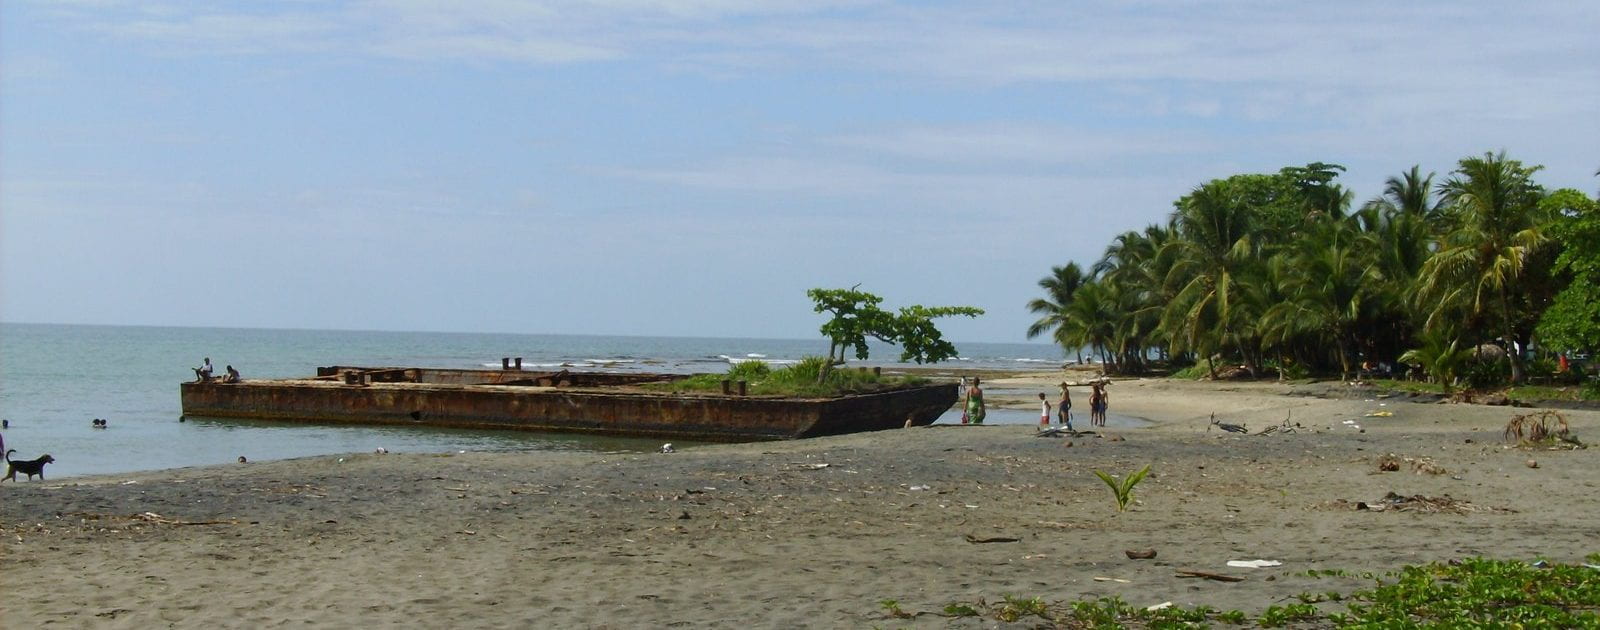 Tree growing out of an old barge on Costa Rican beach